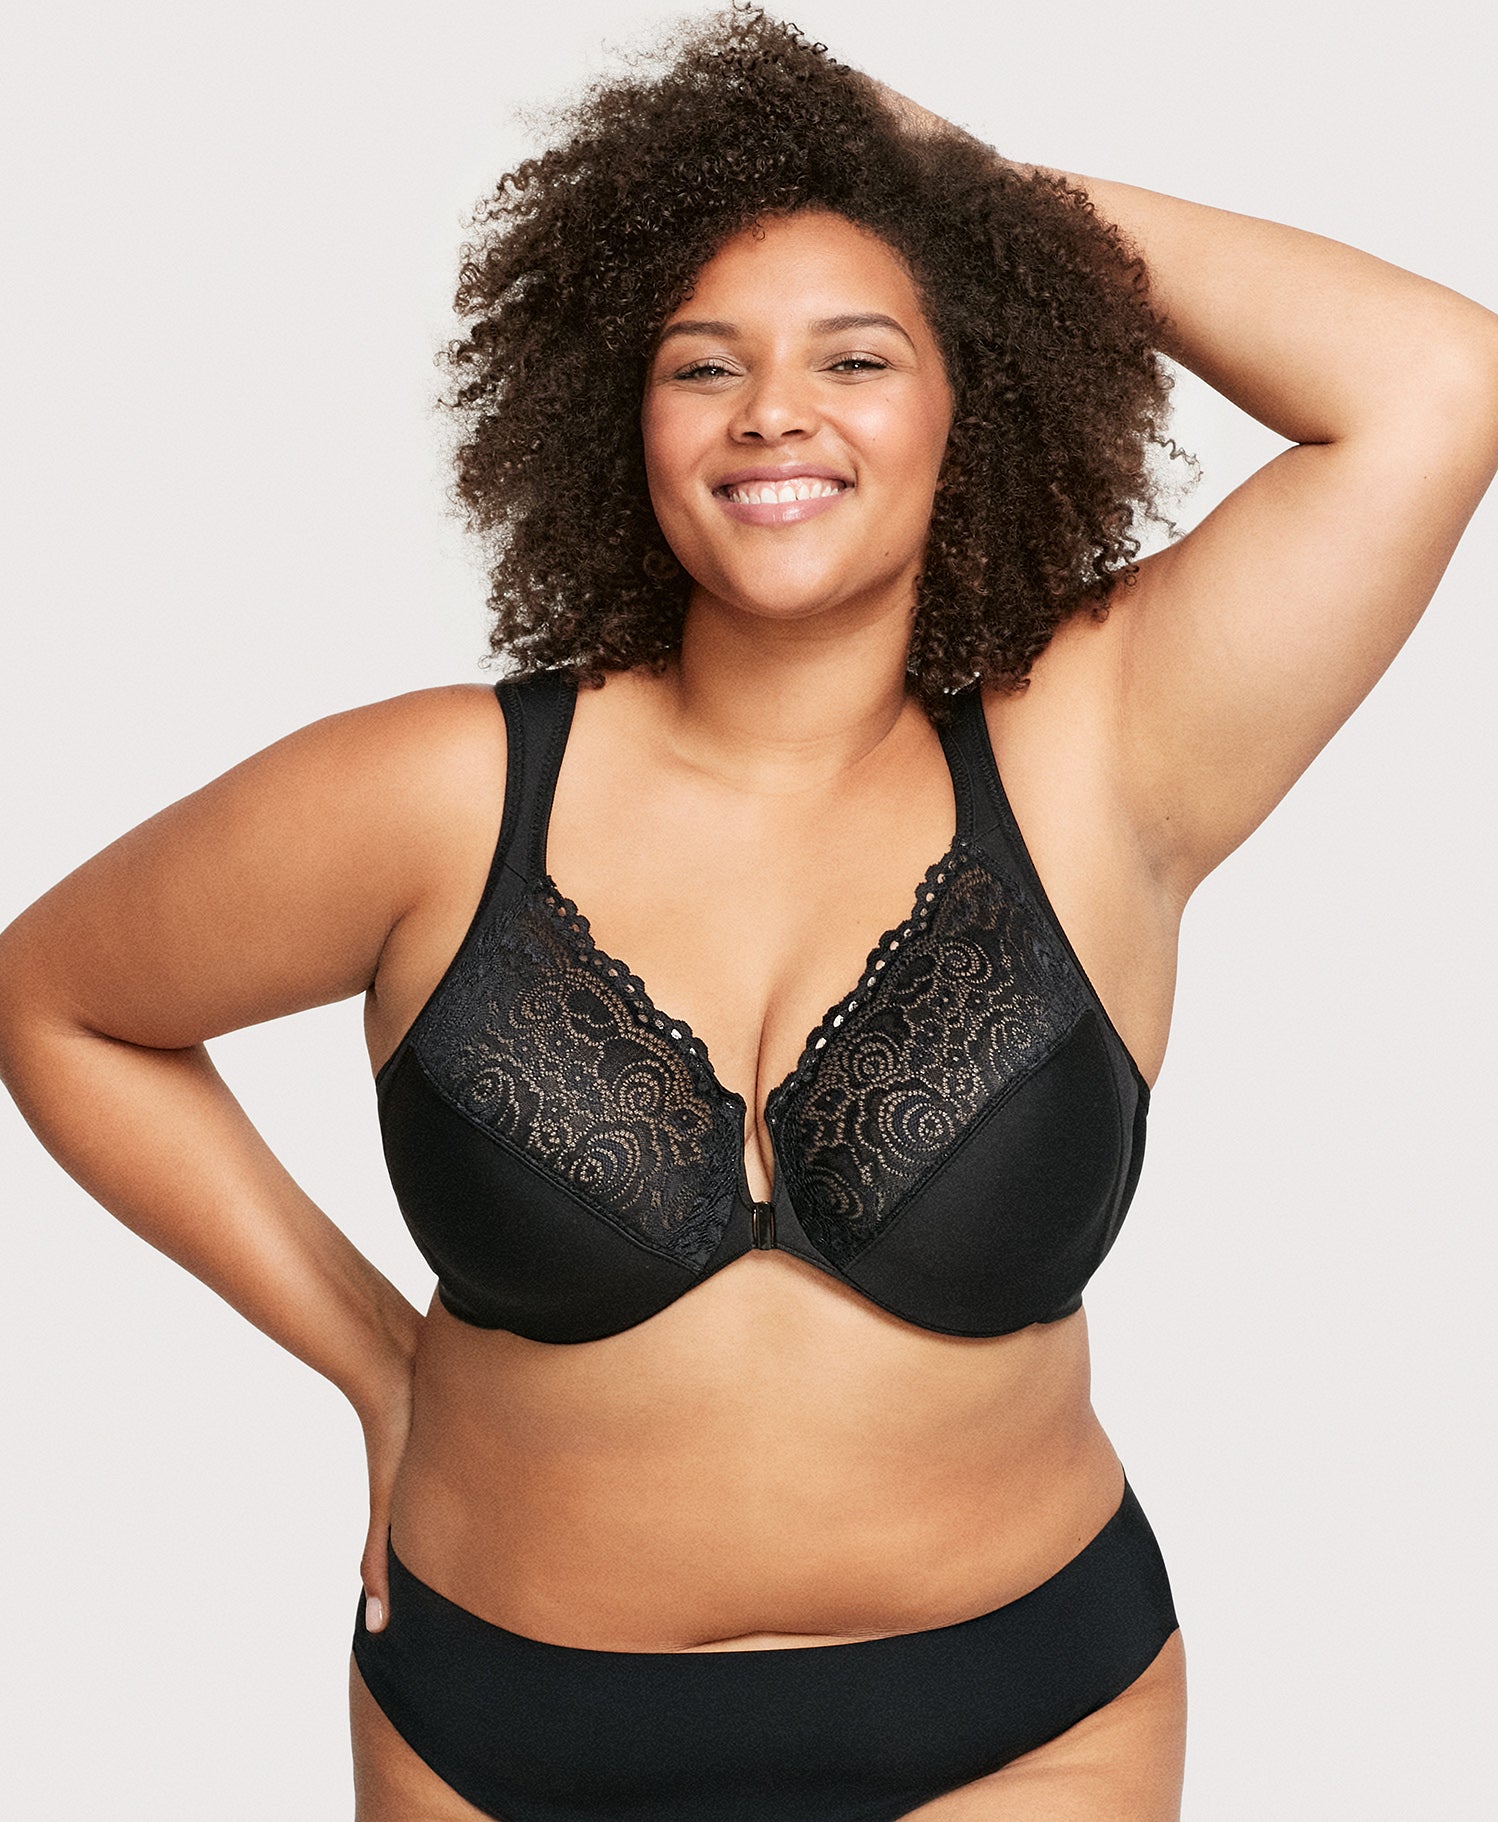 Glamorise on Instagram: @womenshealthmag named the WonderWire Front-Closure  Stretch Lace Bra as one of the best front-closure bras!⁠ ⁠ Read the full  article at the link in bio